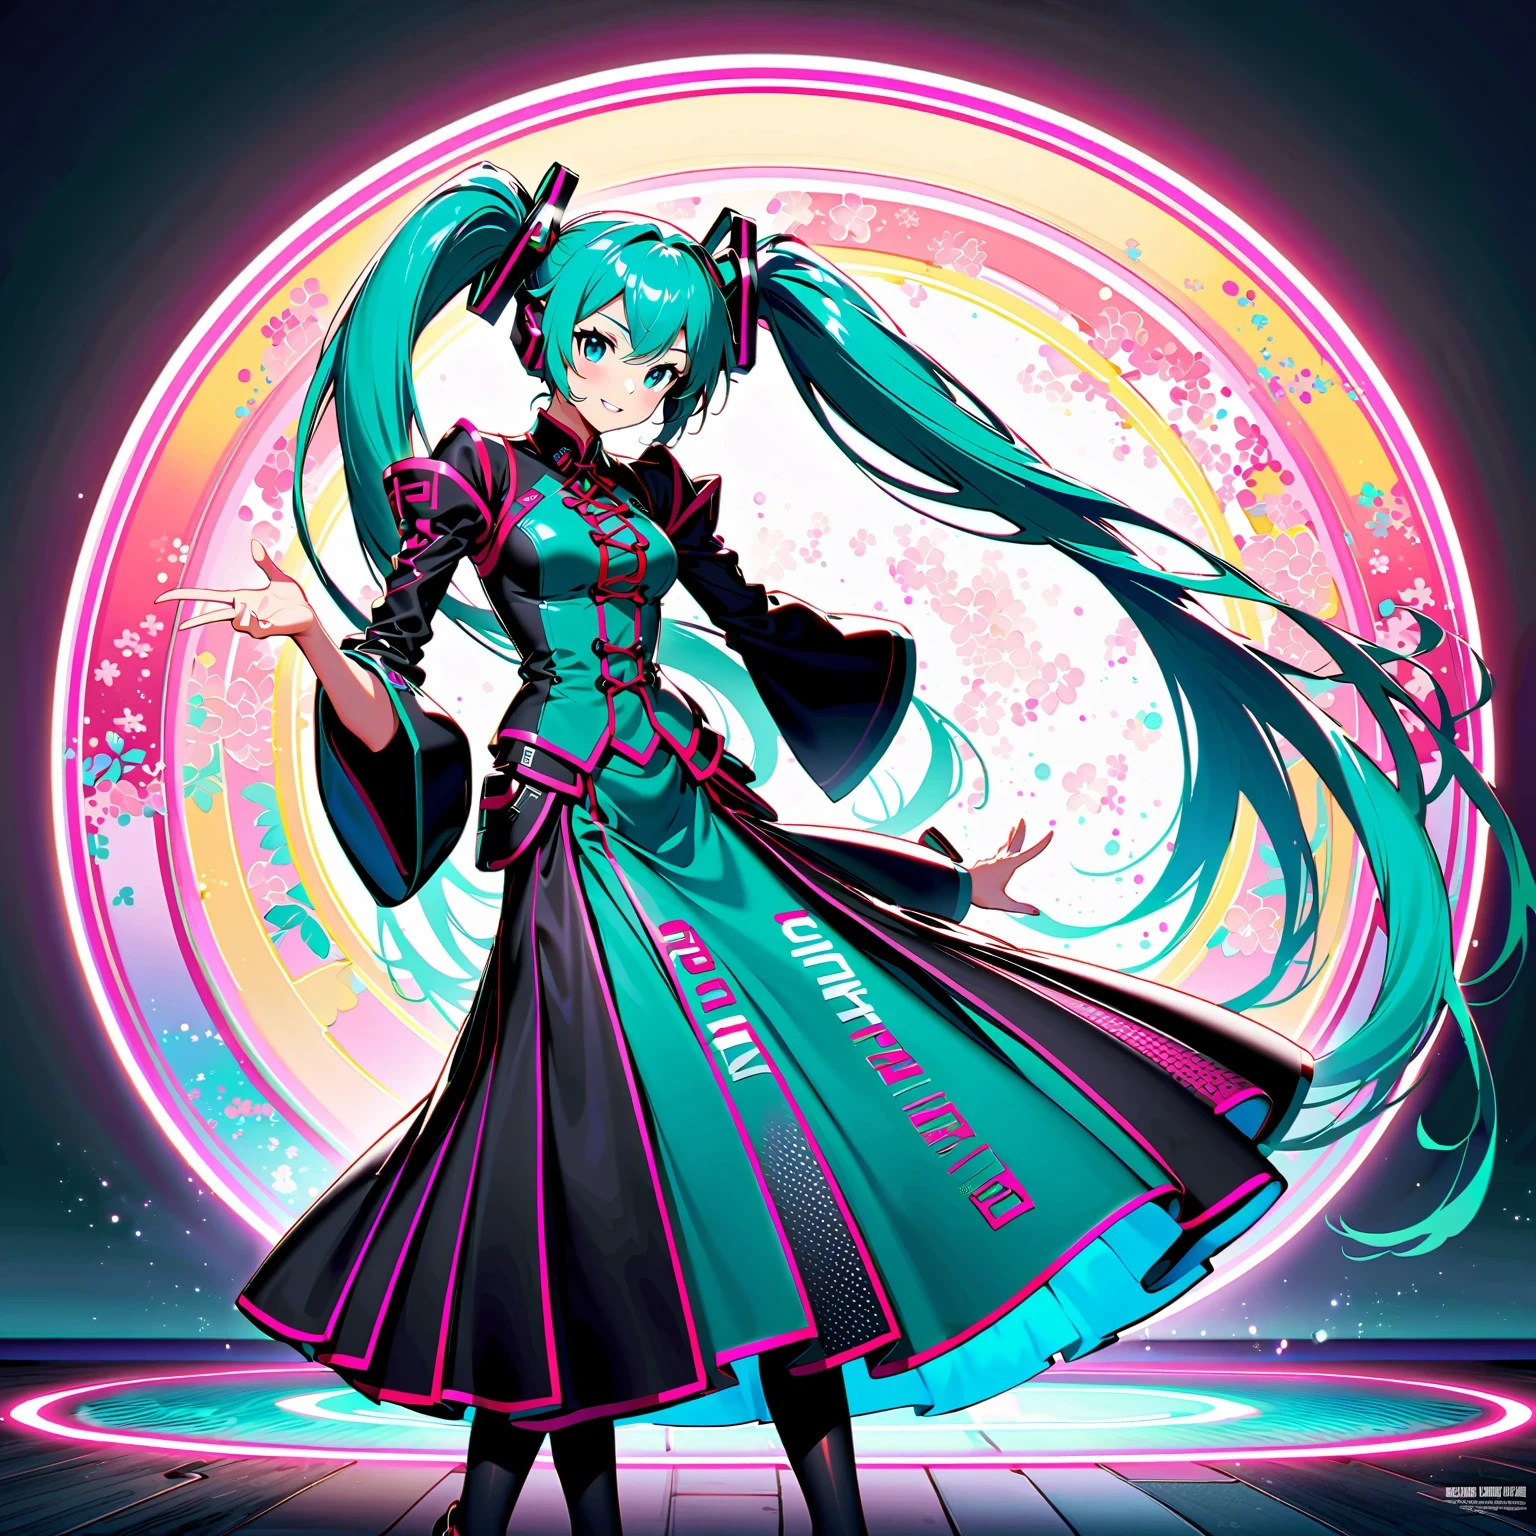 A high-quality, detailed portrait photograph featuring Hatsune Miku, the virtual idol, under vibrant neon lights with a futuristic design. Capture her dynamic dance moves and music beats, infused with a technological vibe and interactive engagement. Incorporate elements of fan culture and Japanese pop culture, along with traditional Chinese fantasy and anime styles, showcasing intricate patterns and elegant costumes. Aim for a visually stunning composition that tells a story and reflects the artistic trends of contemporary photography. Enhance the colors and textures to bring Hatsune Miku to life, maintaining a realistic and authentic look